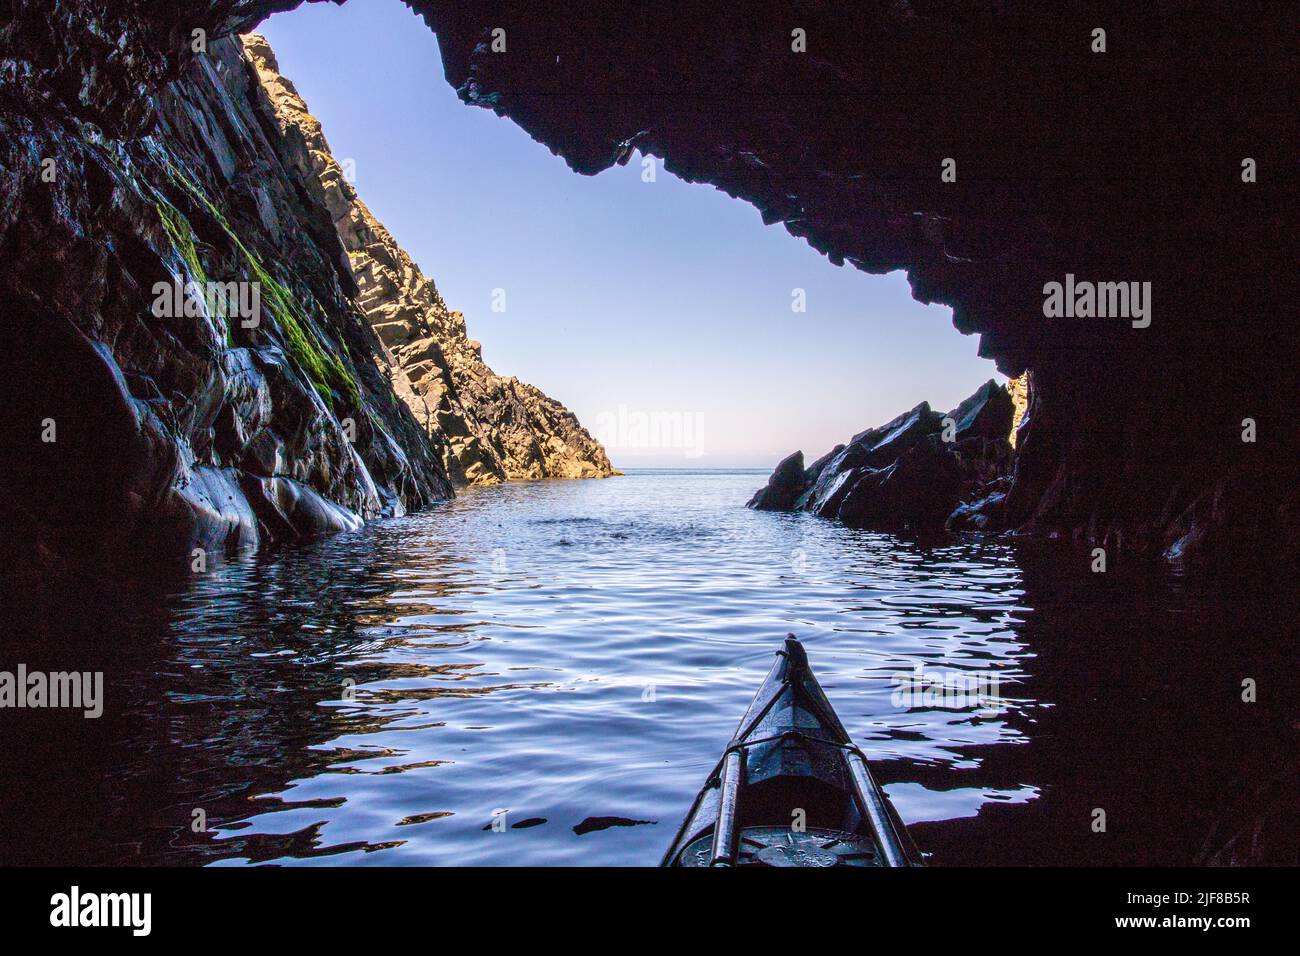 Sea kayaking in a sea cave off the Pembrokeshire Coast in Wales Stock Photo